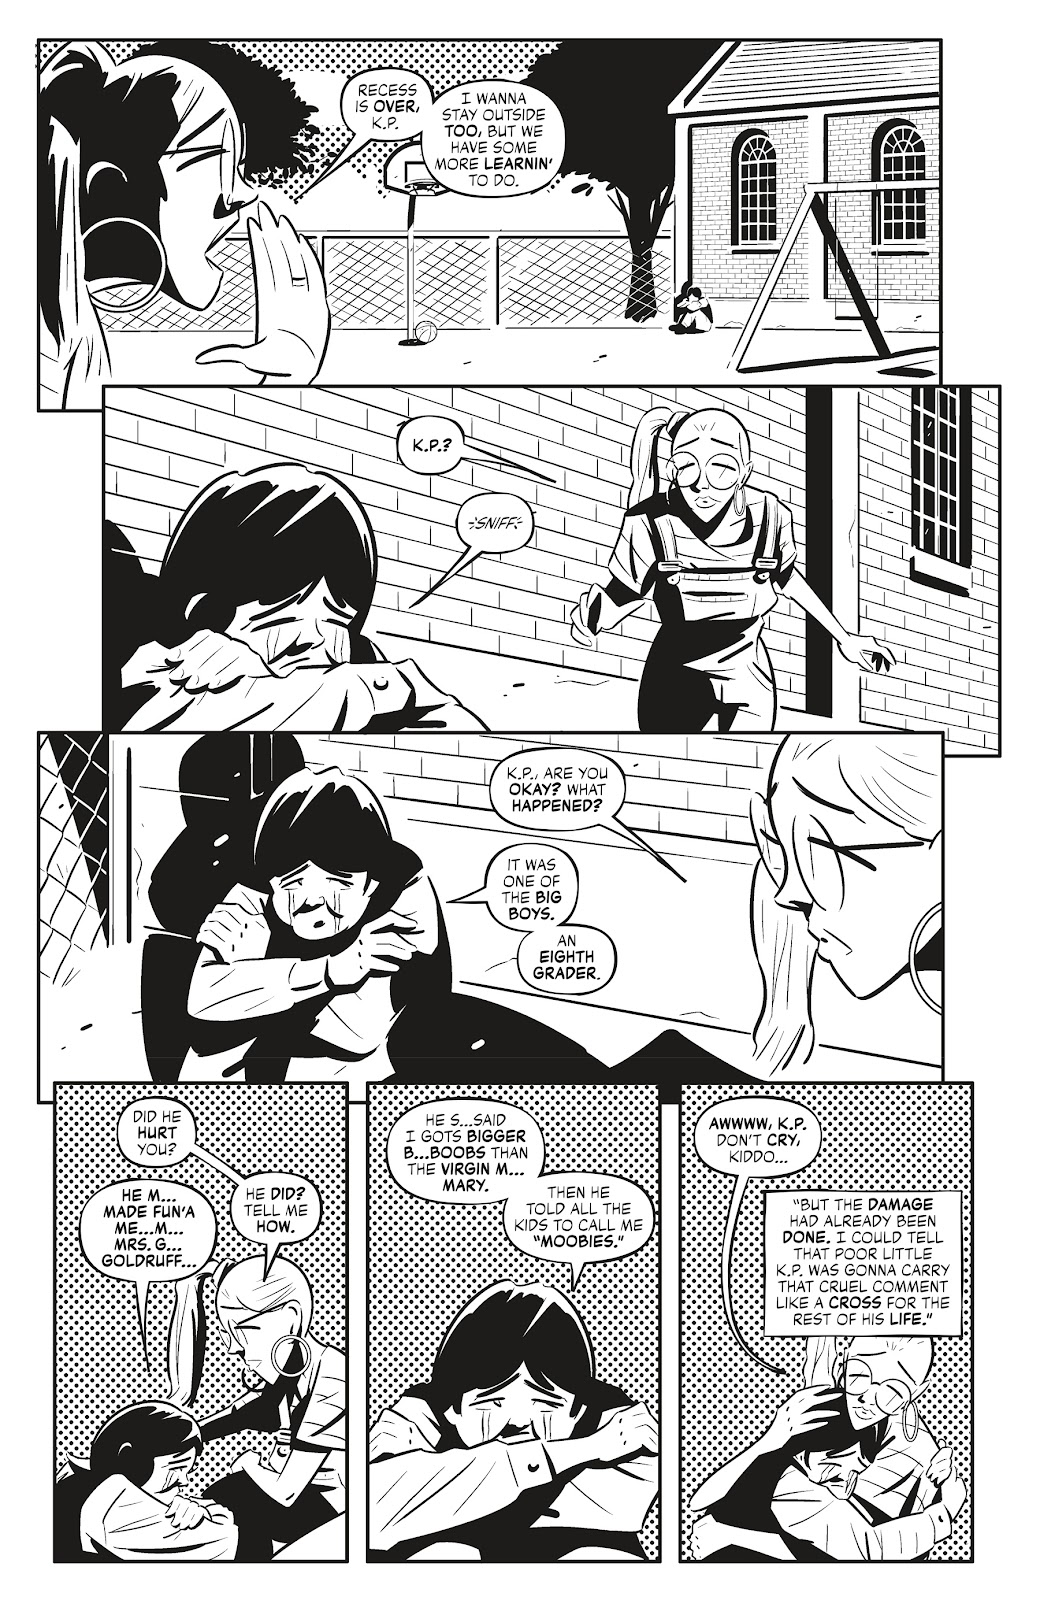 Quick Stops Vol. 2 issue 1 - Page 5